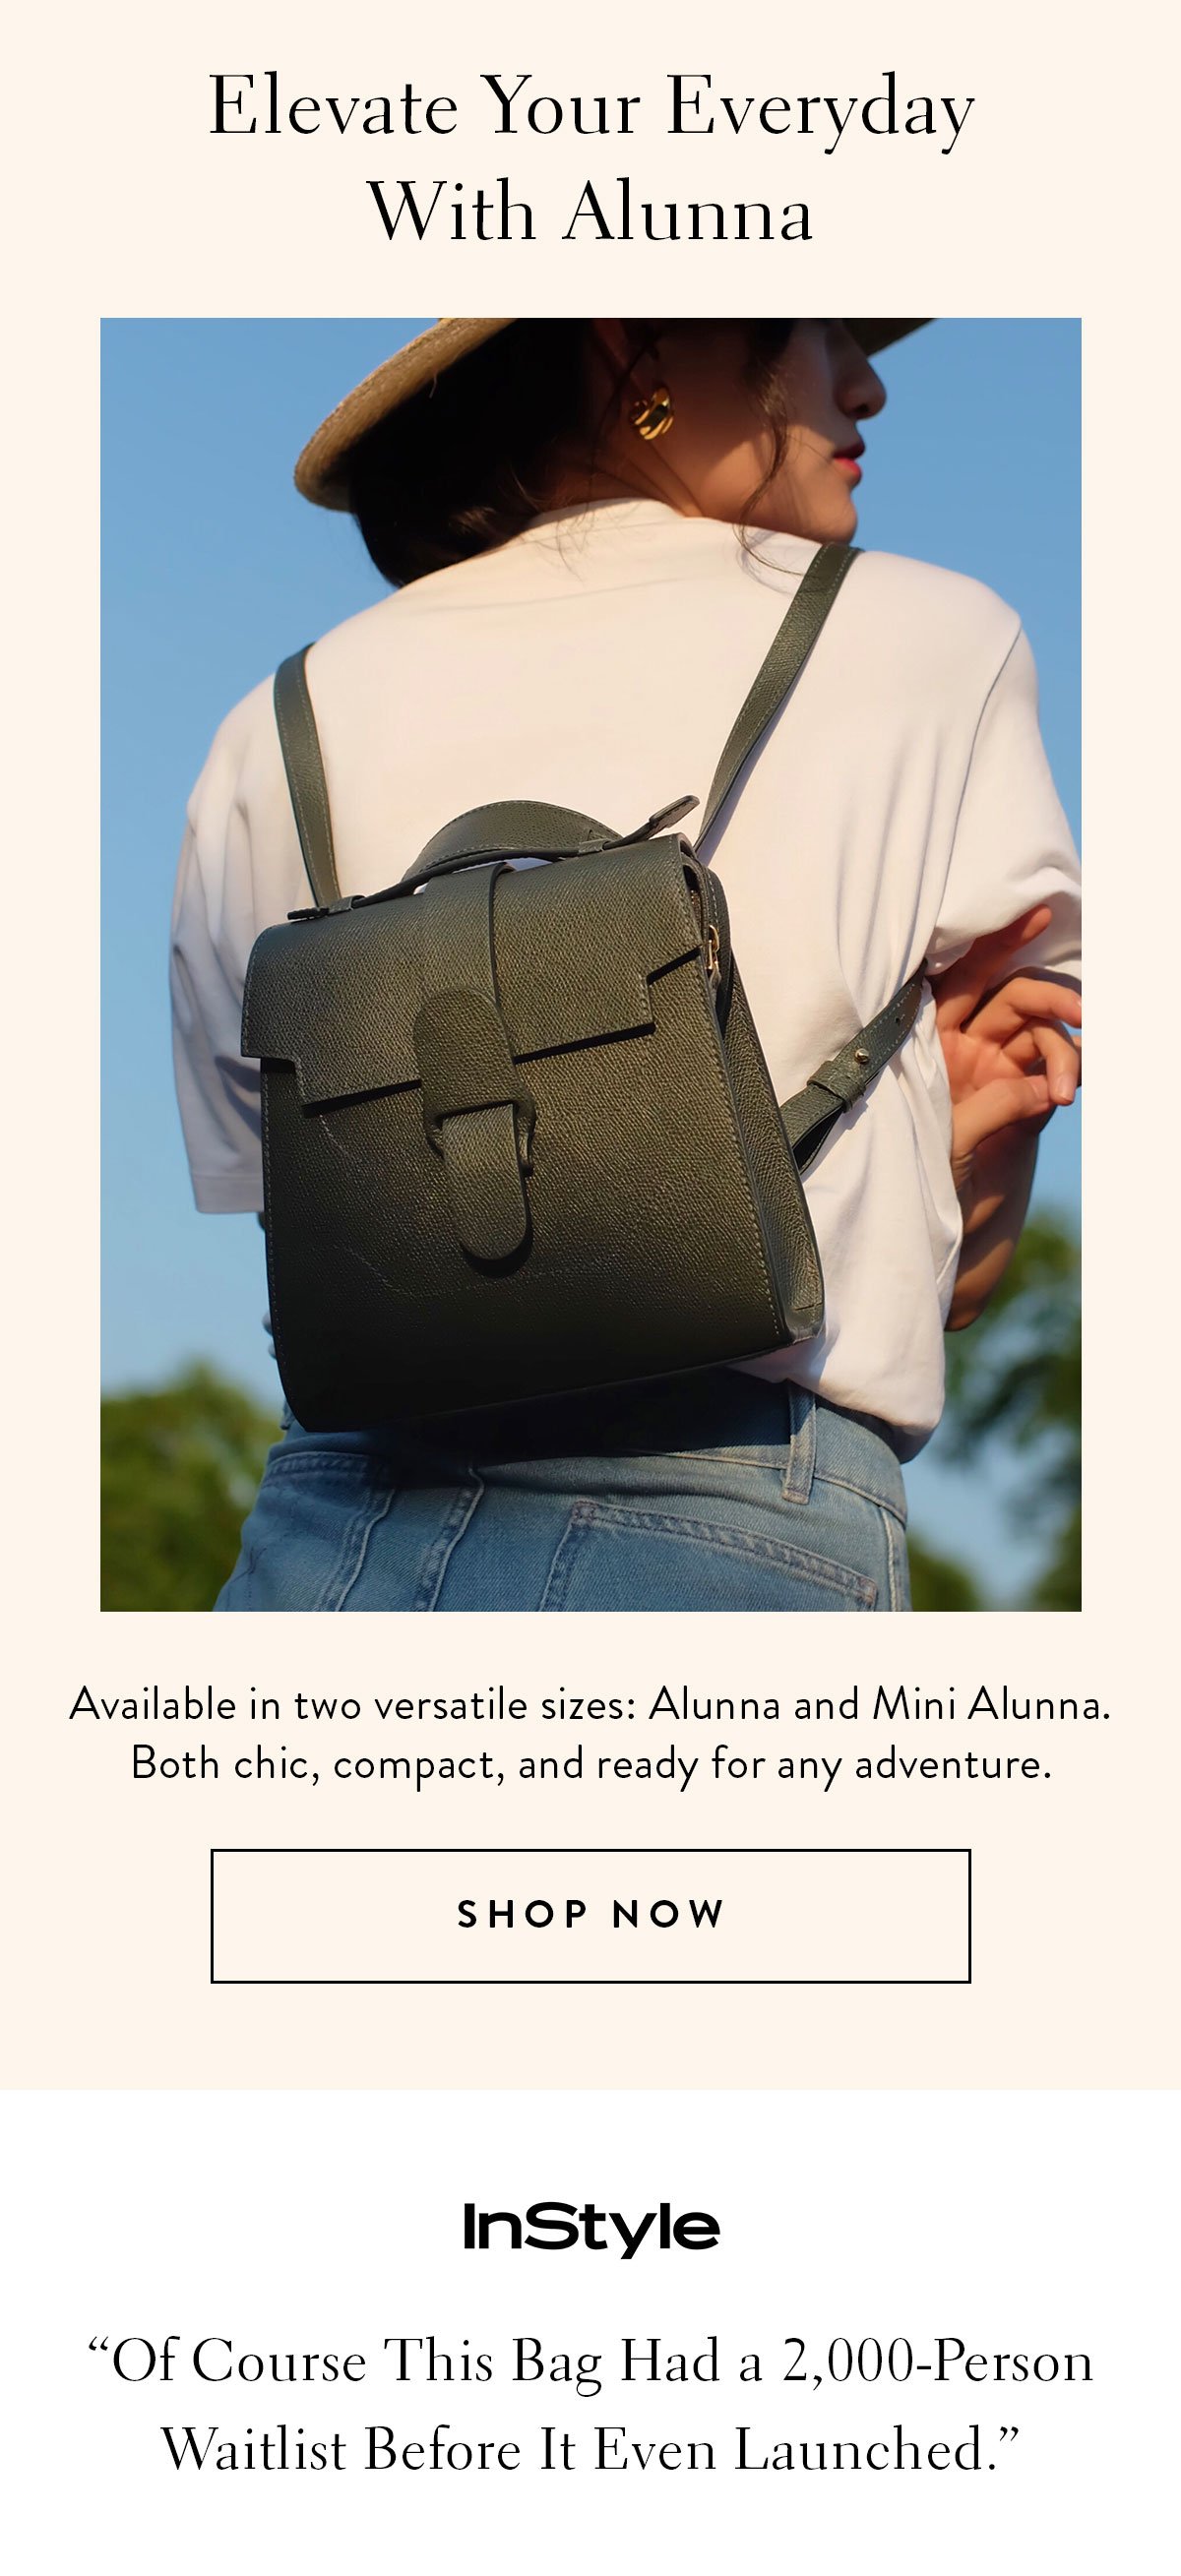 Of Course This Bag Had a 2,000-Person Waitlist Before It Even Launched